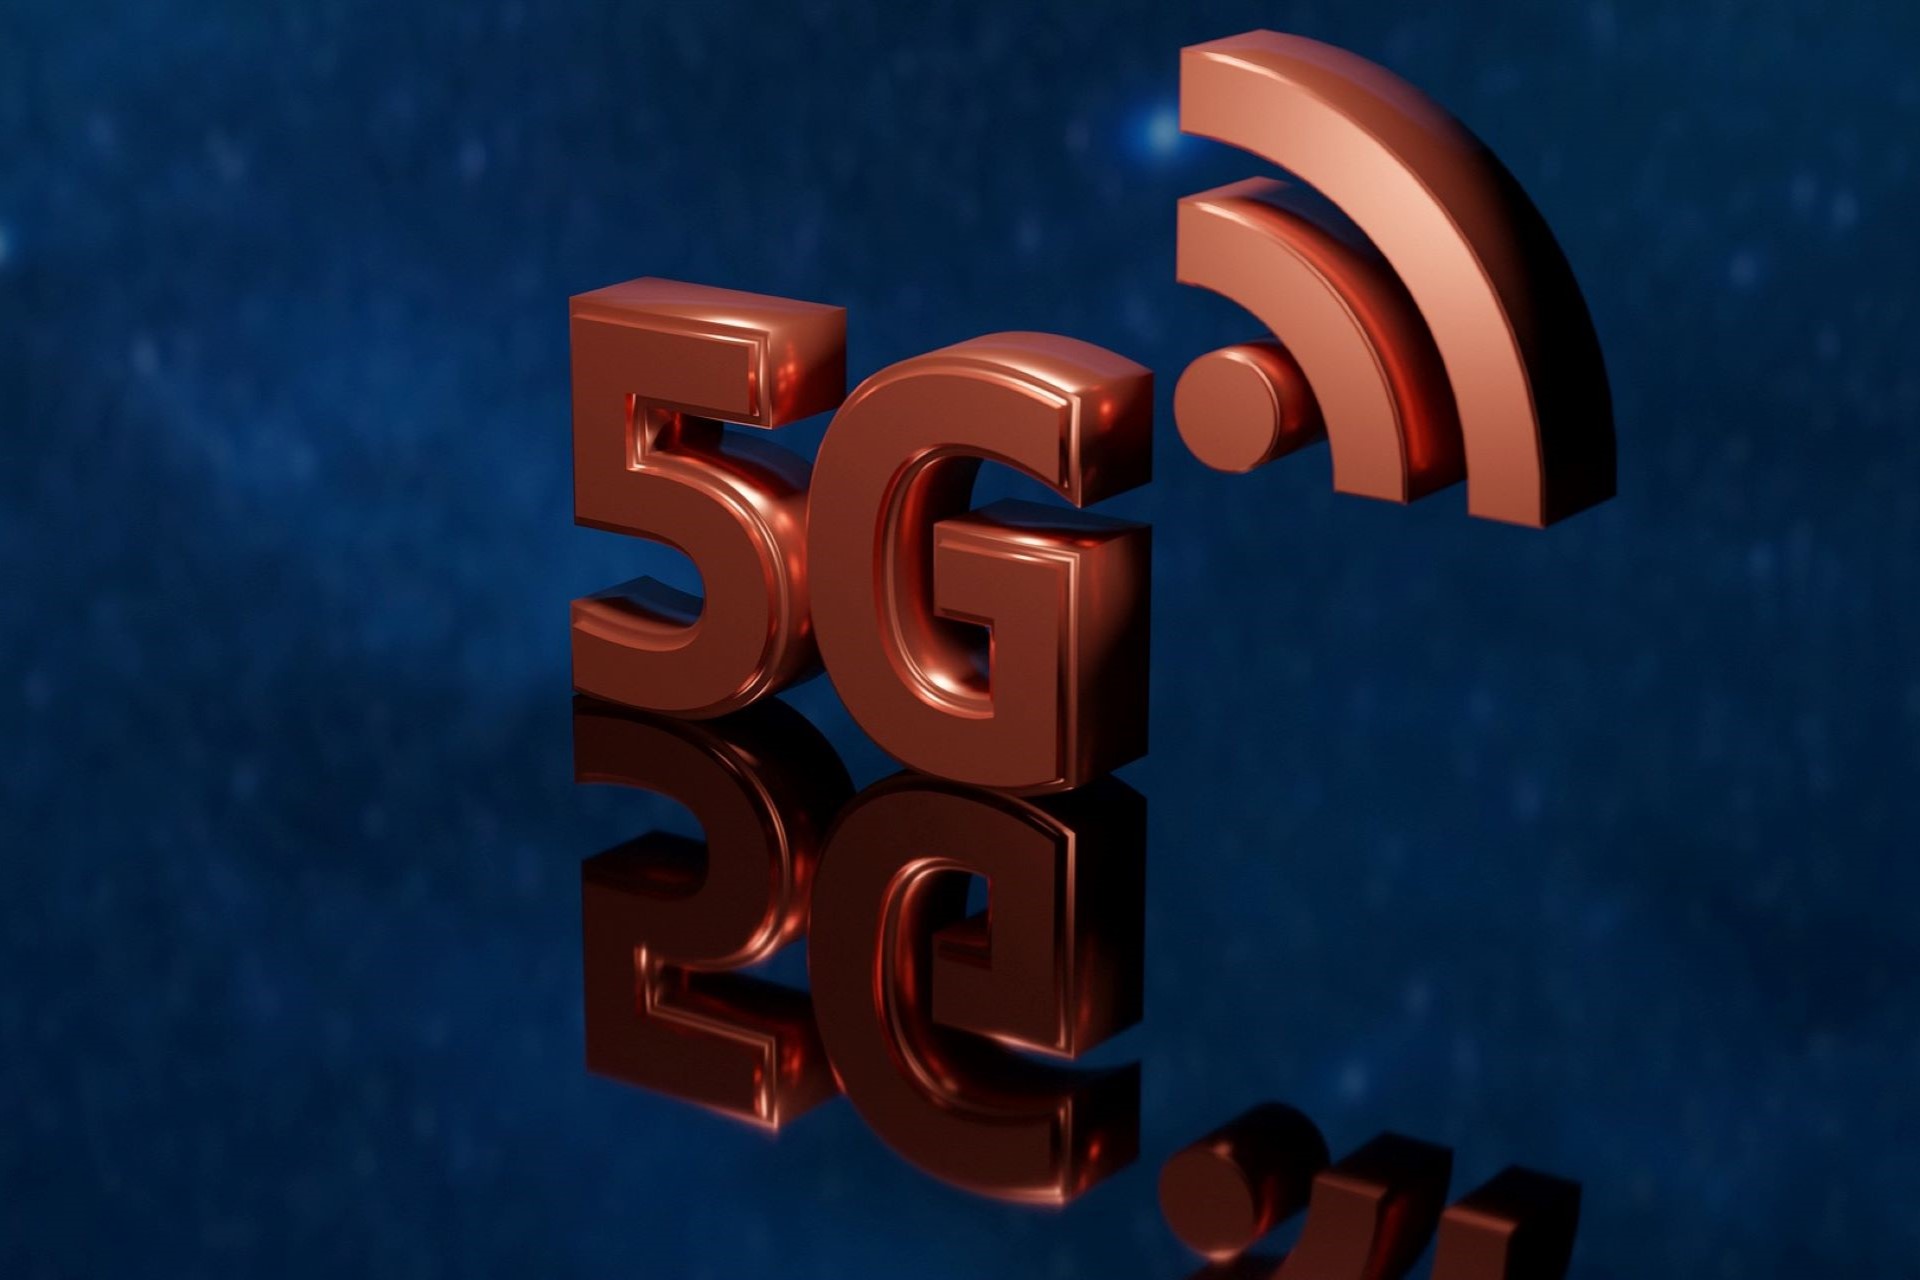 5G Network: Accelerating Connectivity